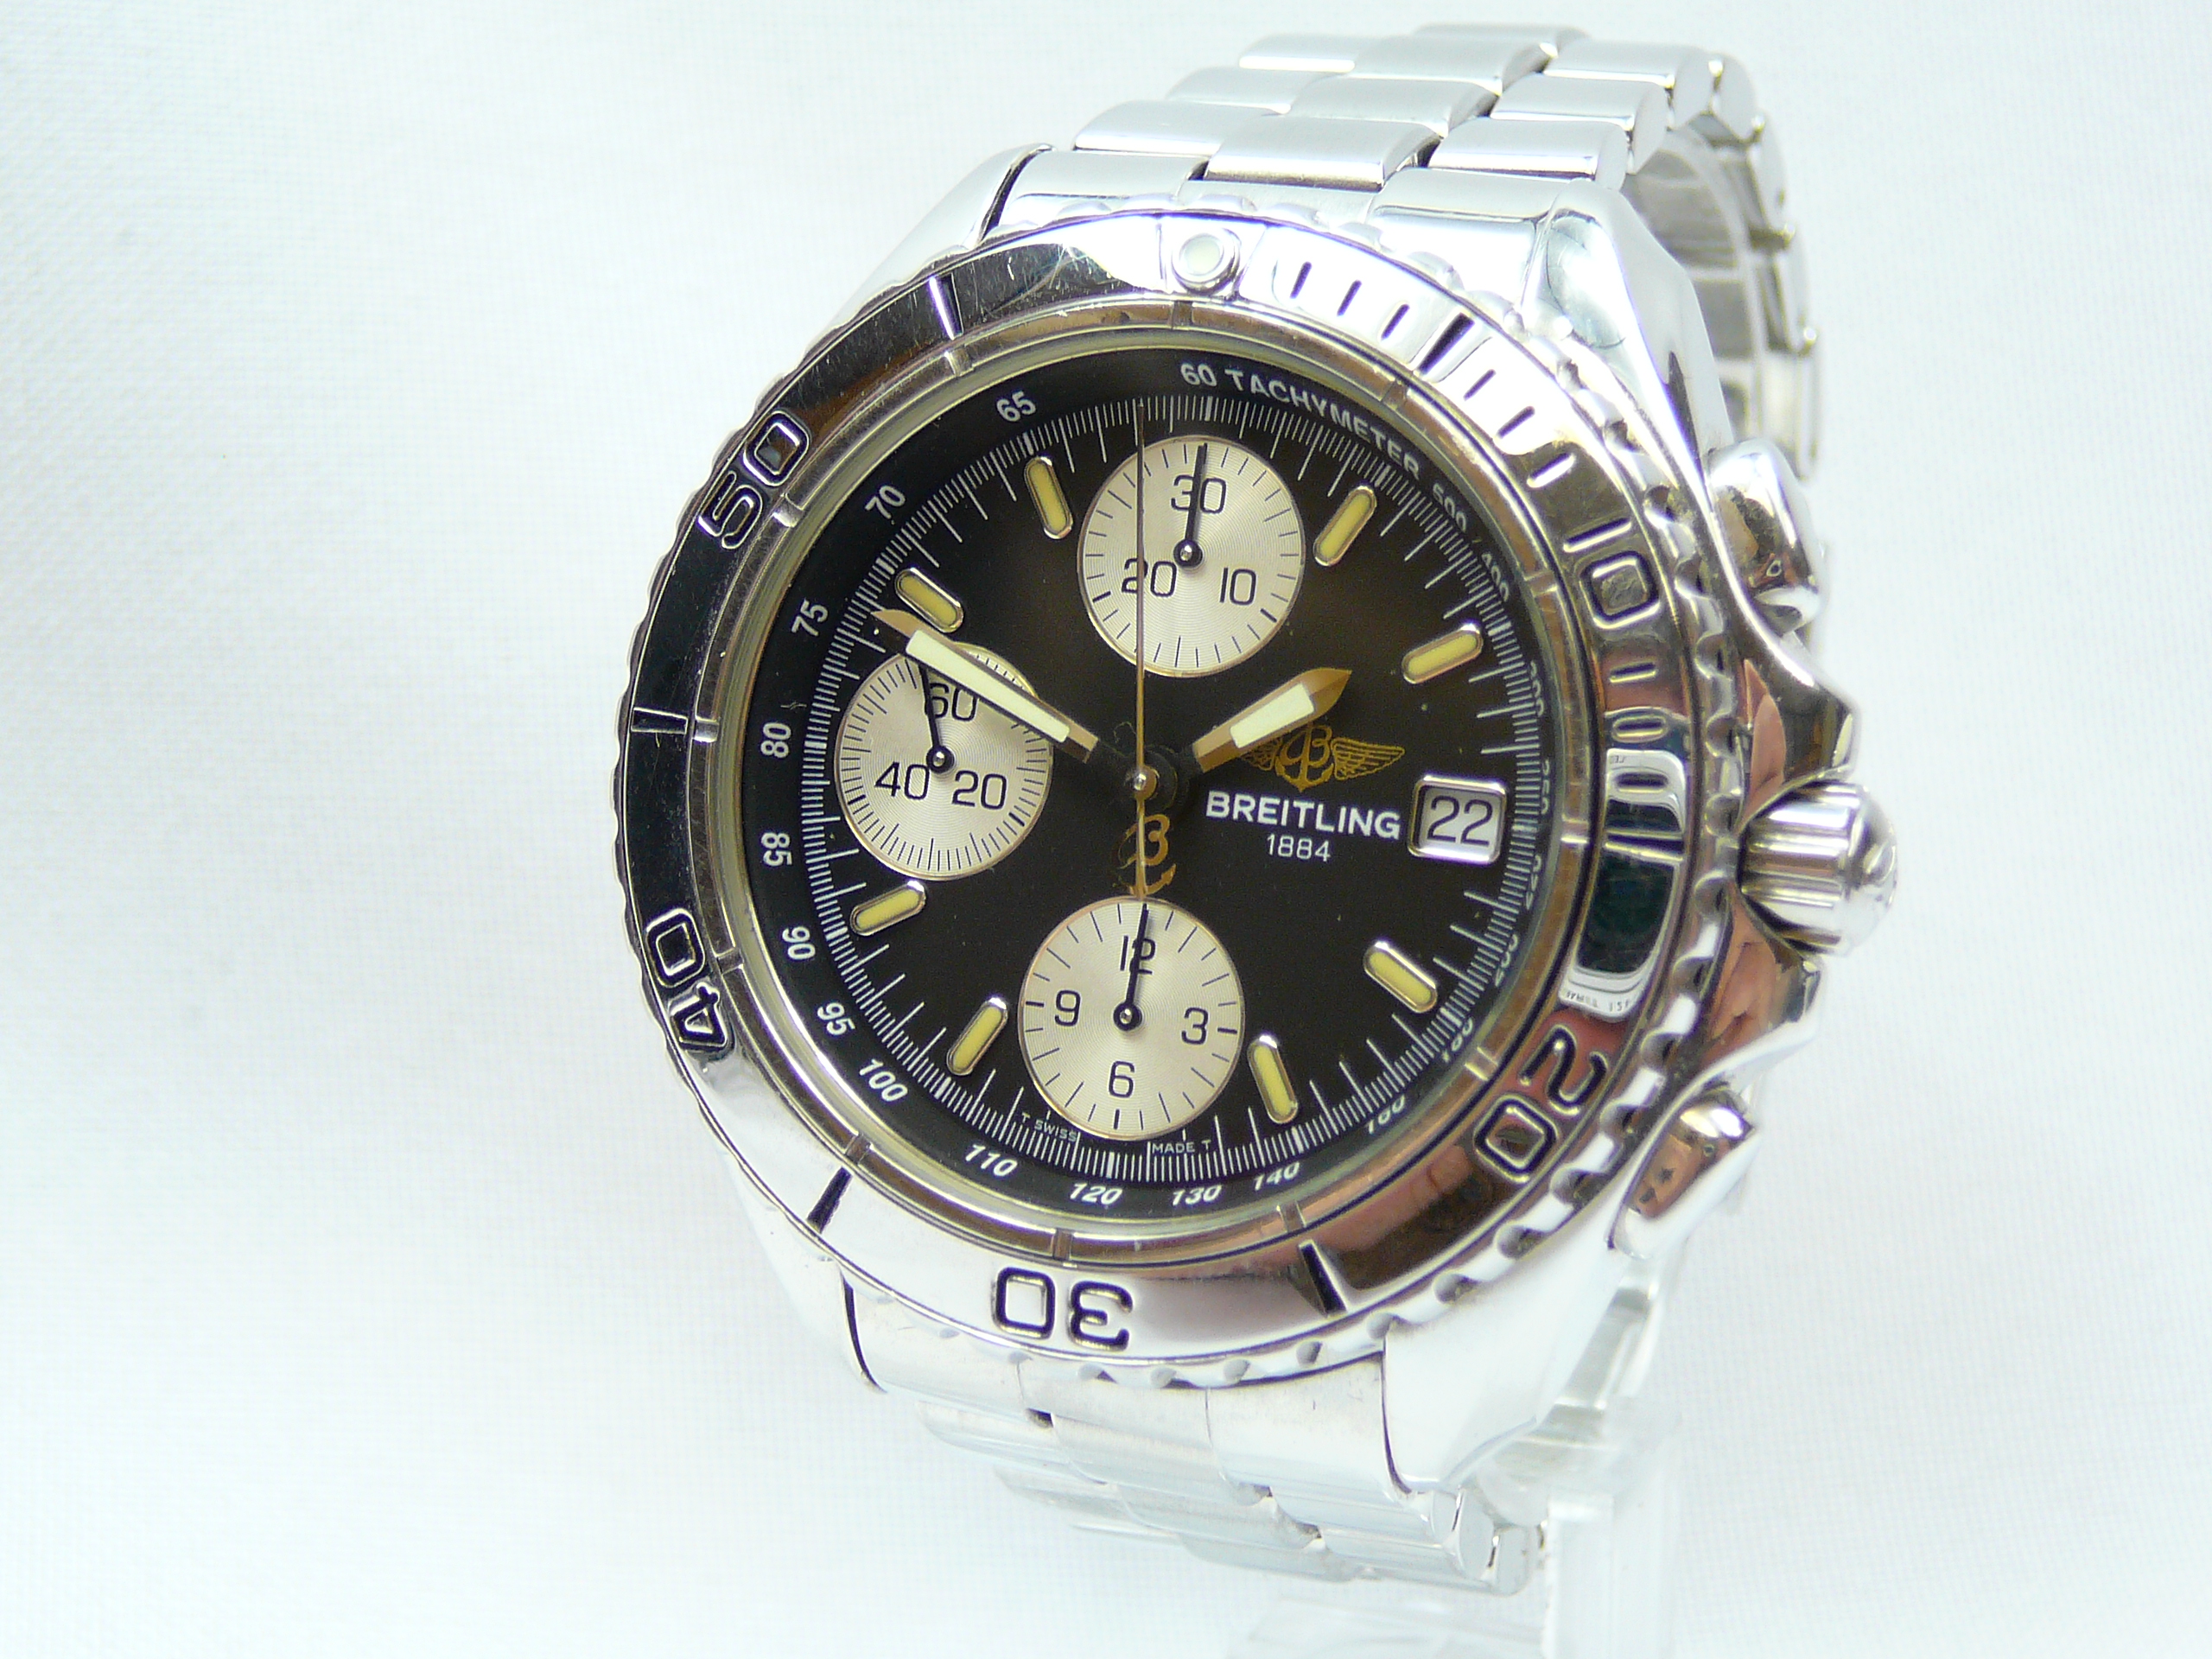 Gents Breitling Wristwatch - Image 3 of 4